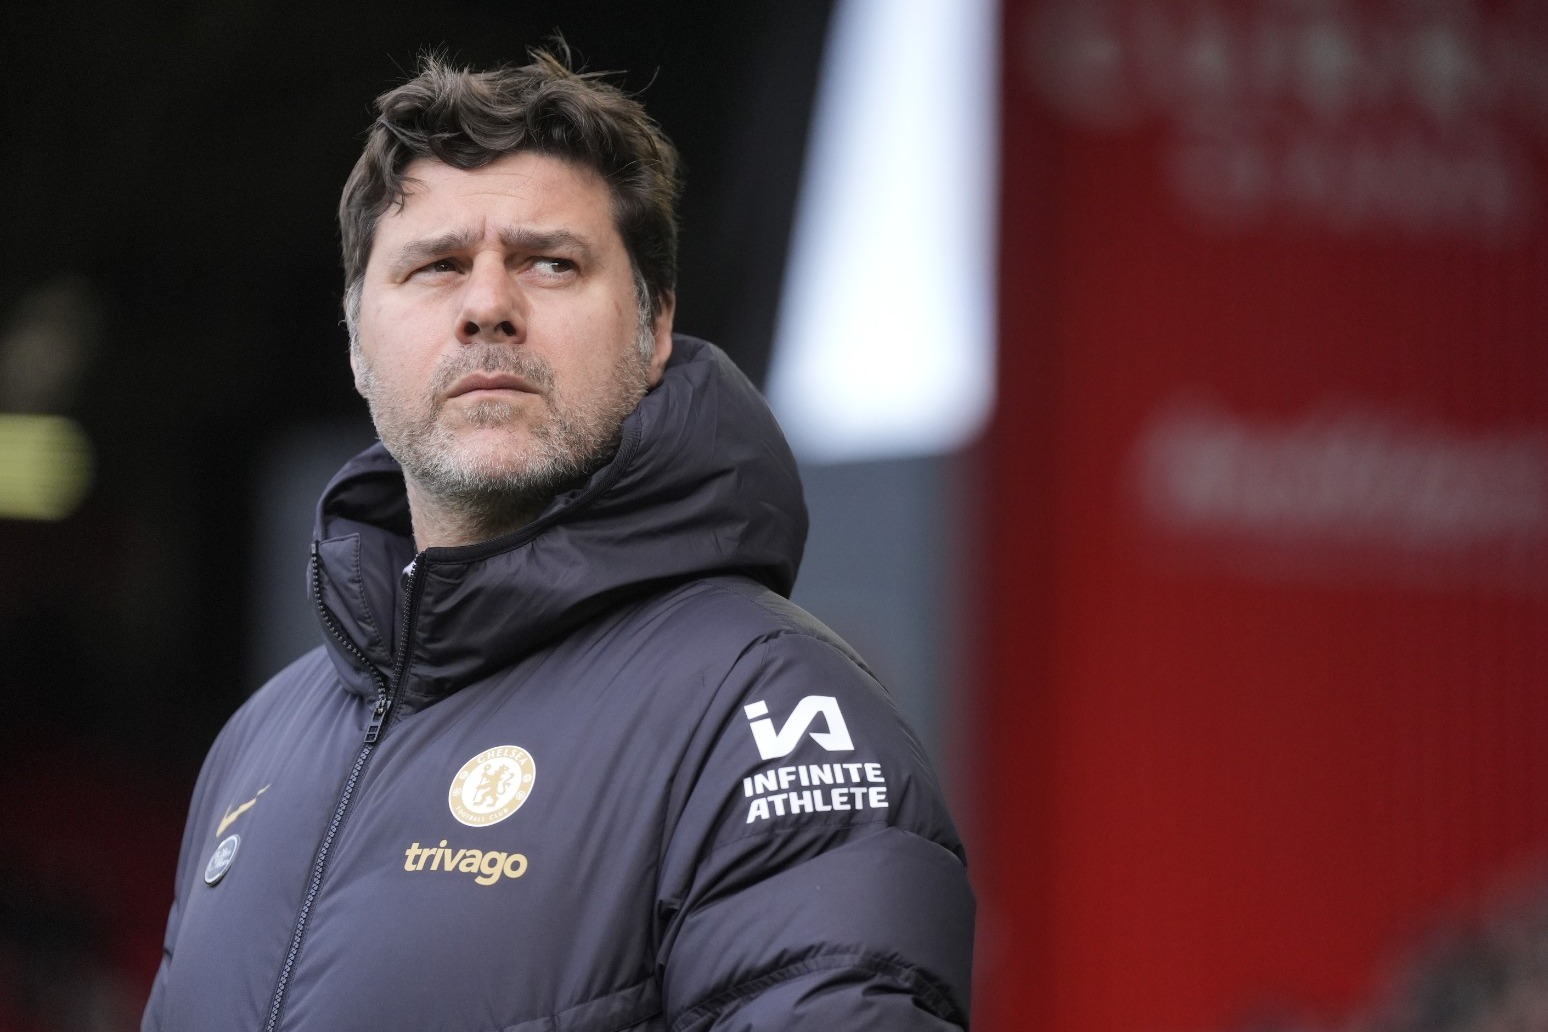 Mauricio Pochettino leaves Chelsea after just one season in charge